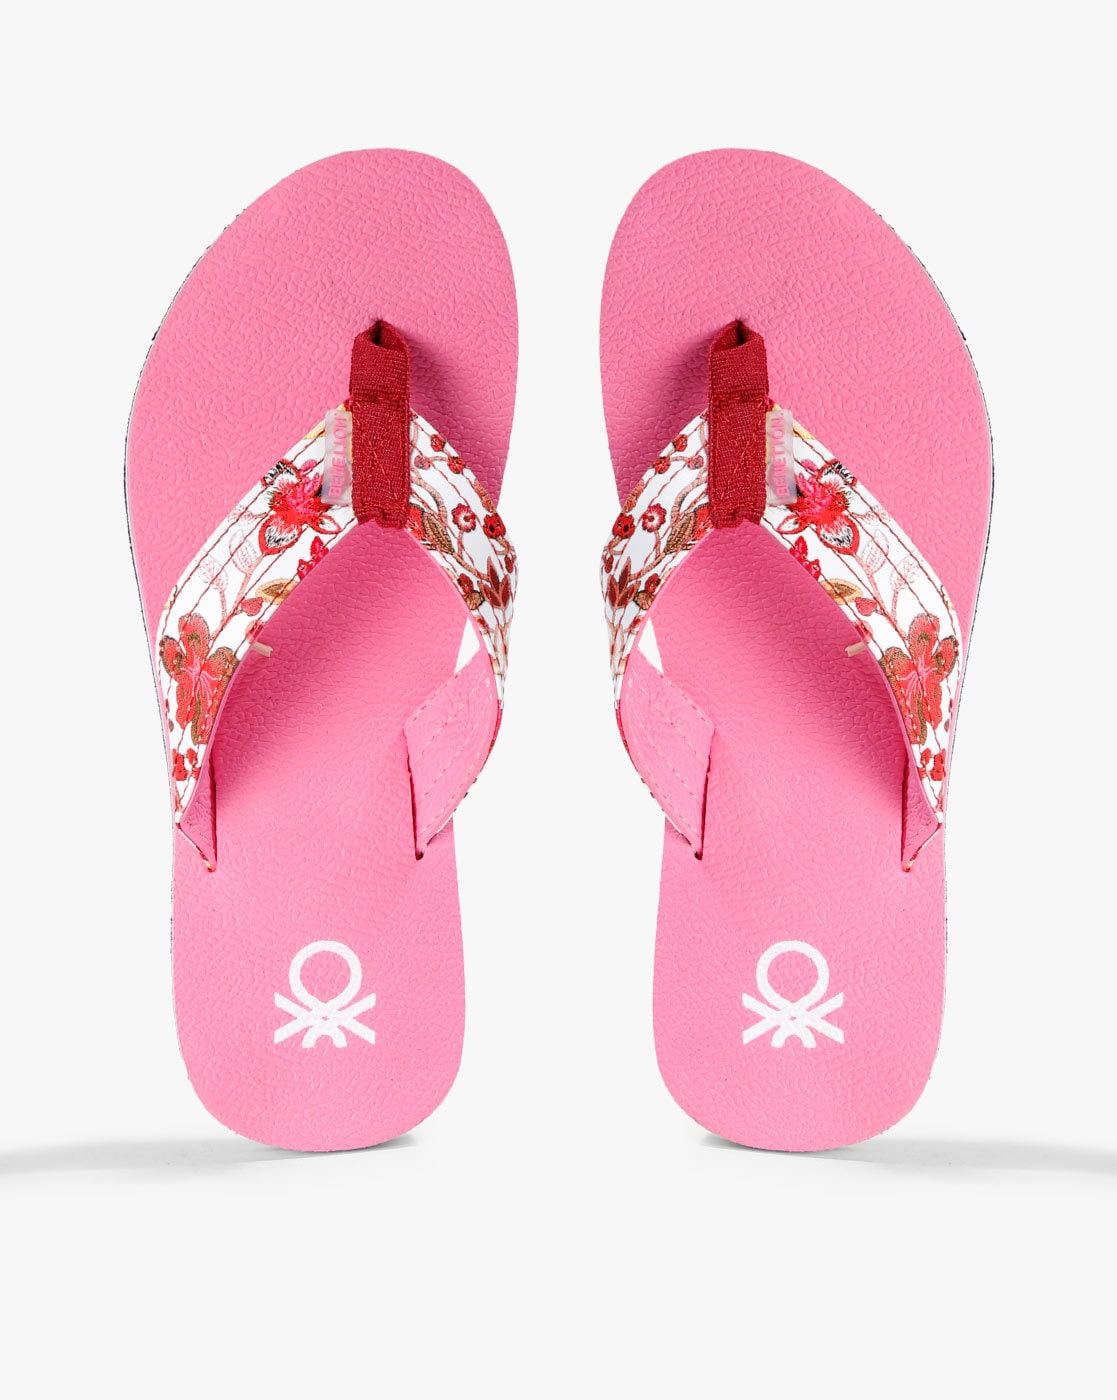 flip flops with flowers on them